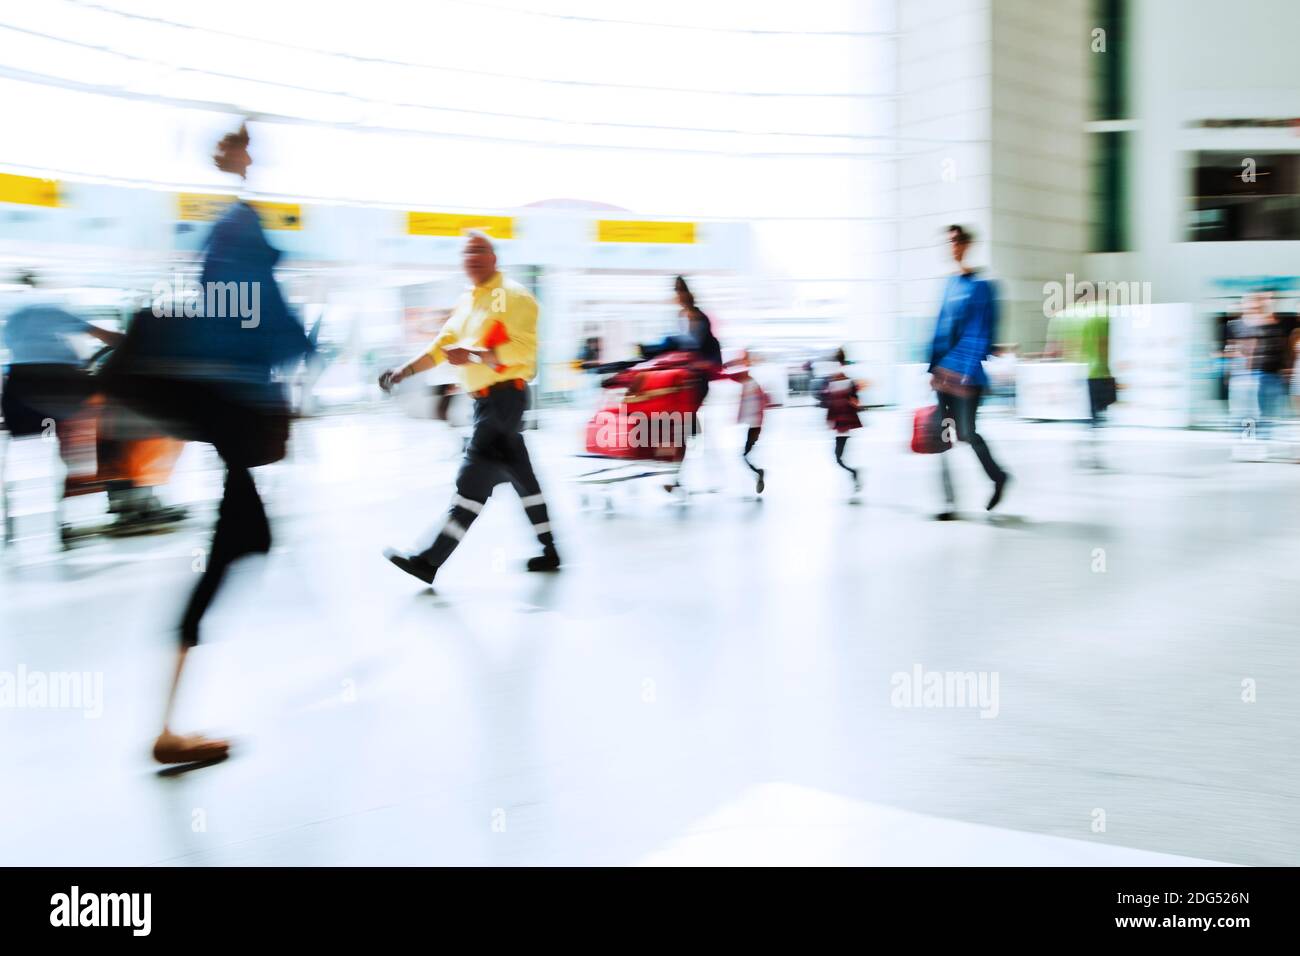 Walking crowd in the airport hall in motion blur Stock Photo